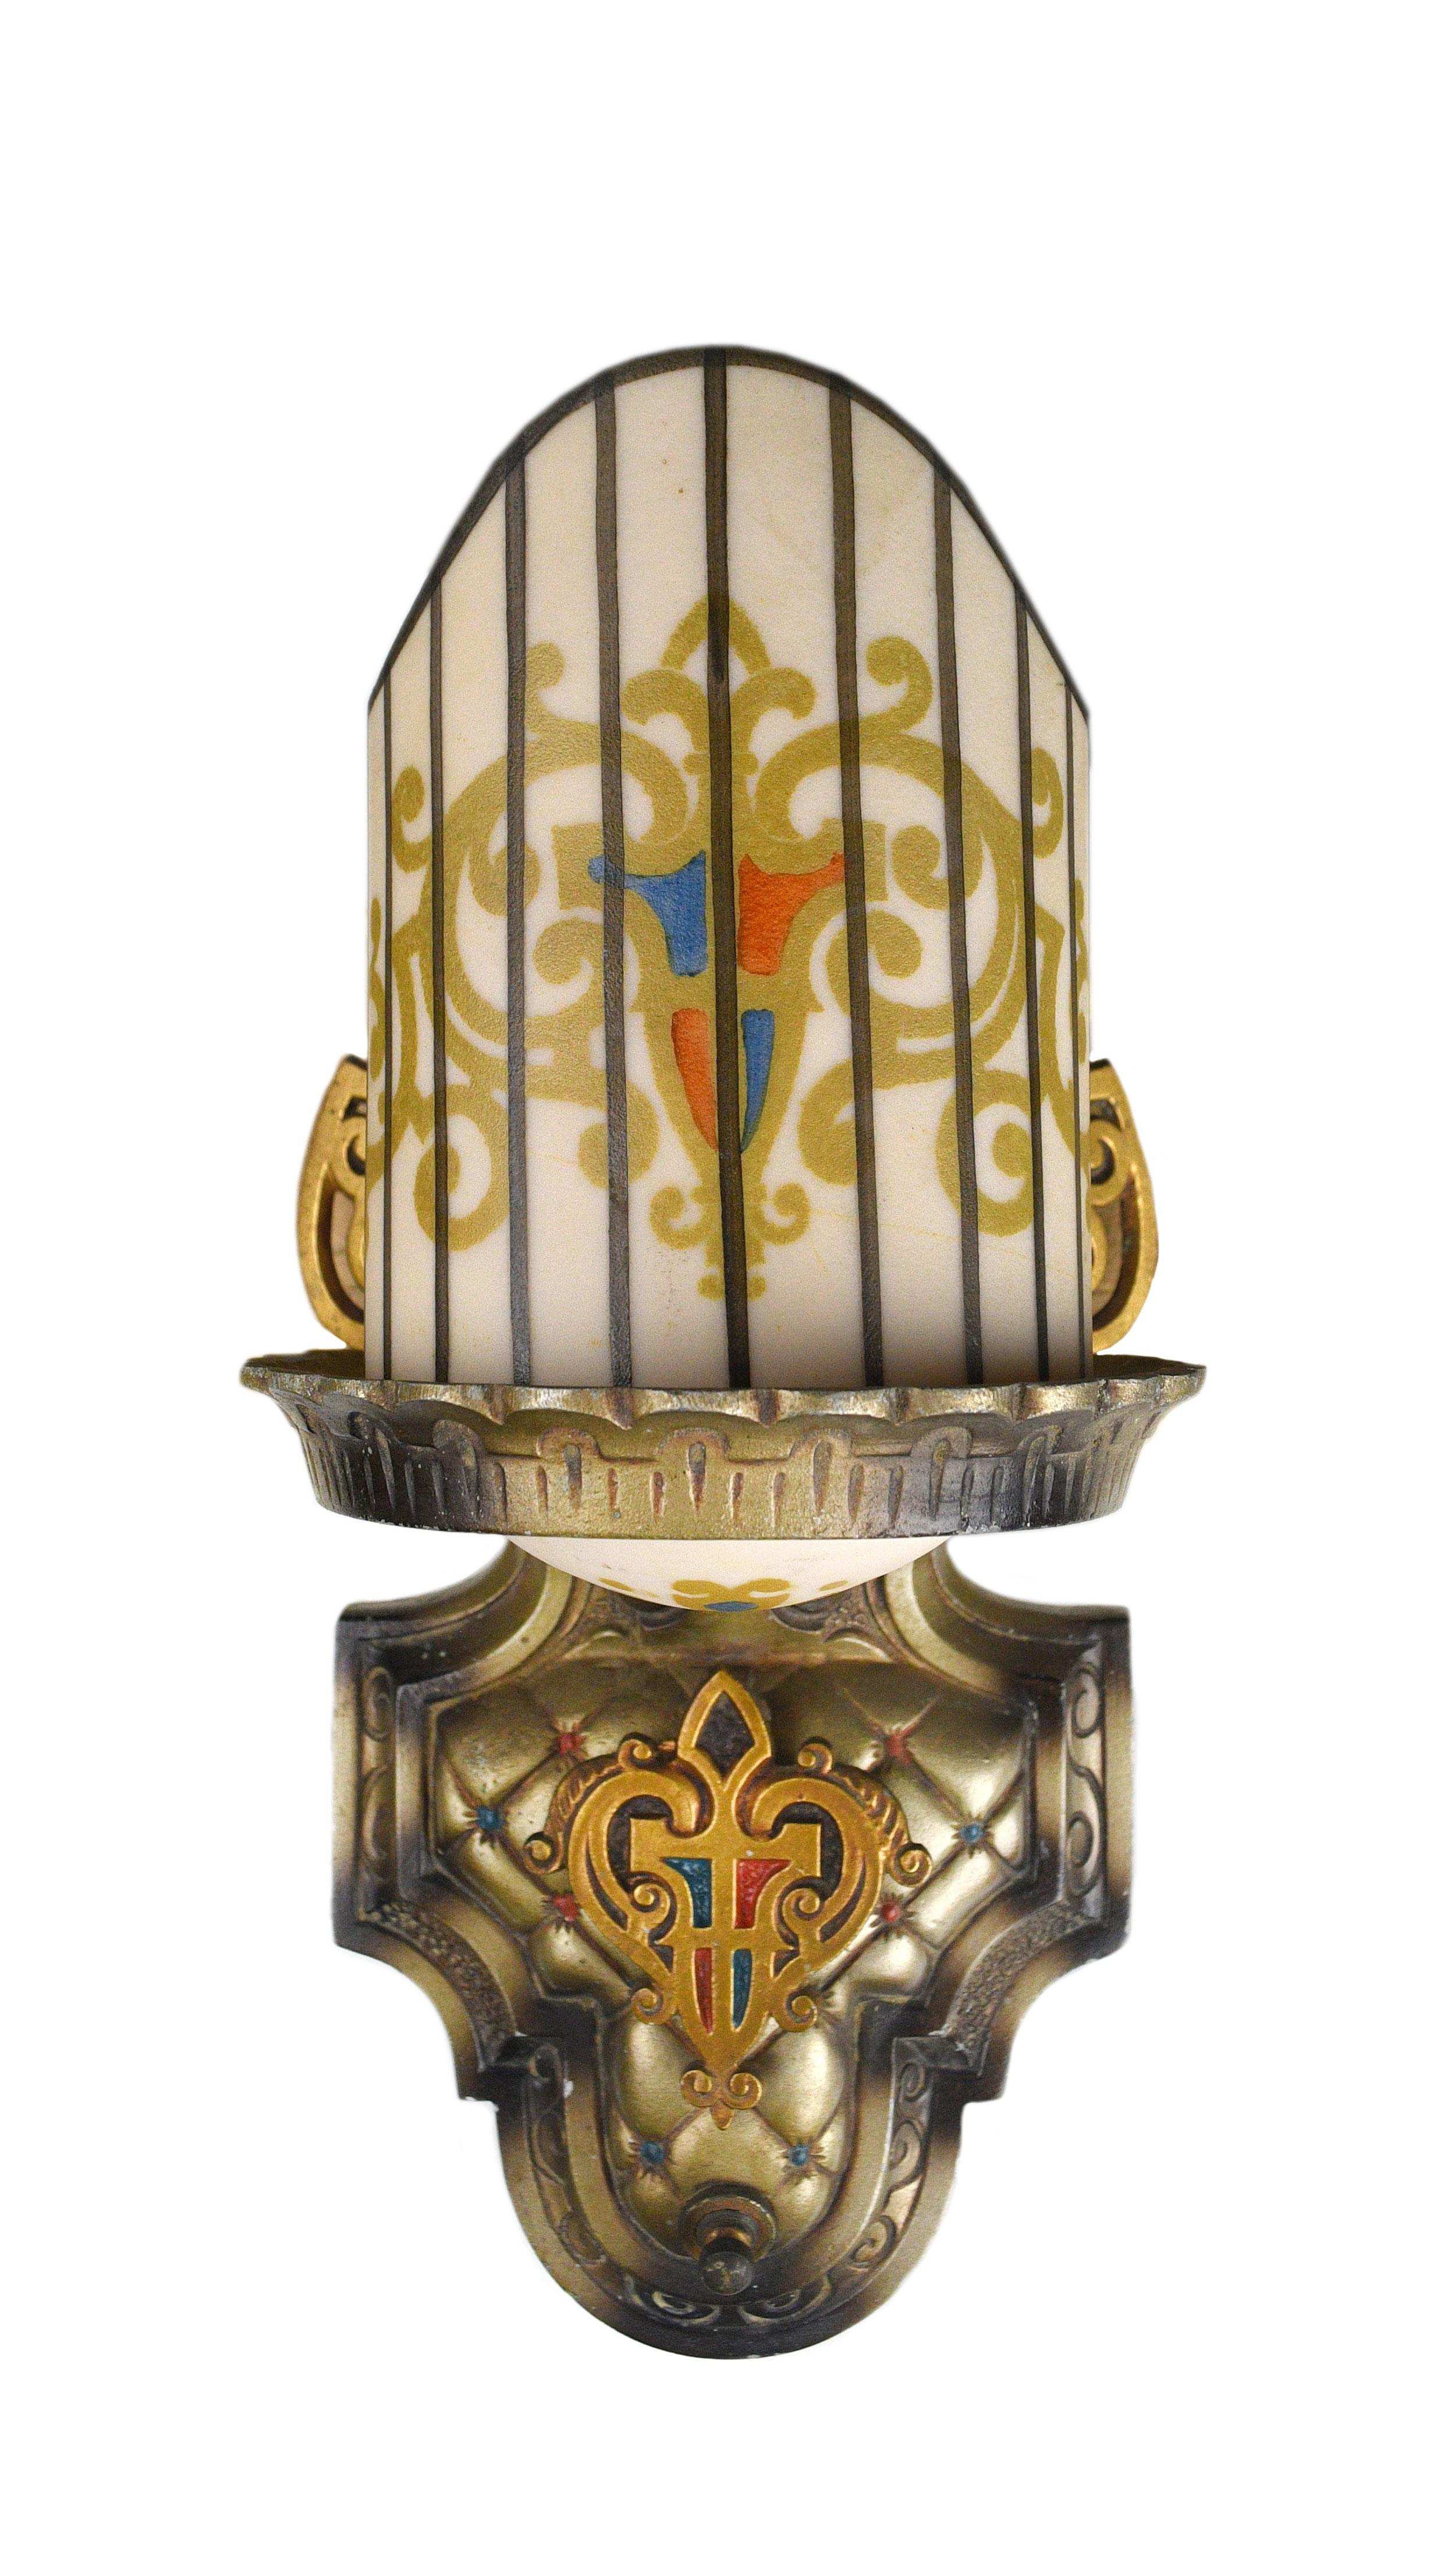 These stunningly crafted Beardslee sconces feature a handsome geometric Art Deco design and give off a warm glow when illuminated. 

Produced from Chicago’s Premium lighting supplier in the 1930s, this chandelier is signed Williamson & Co, a truly